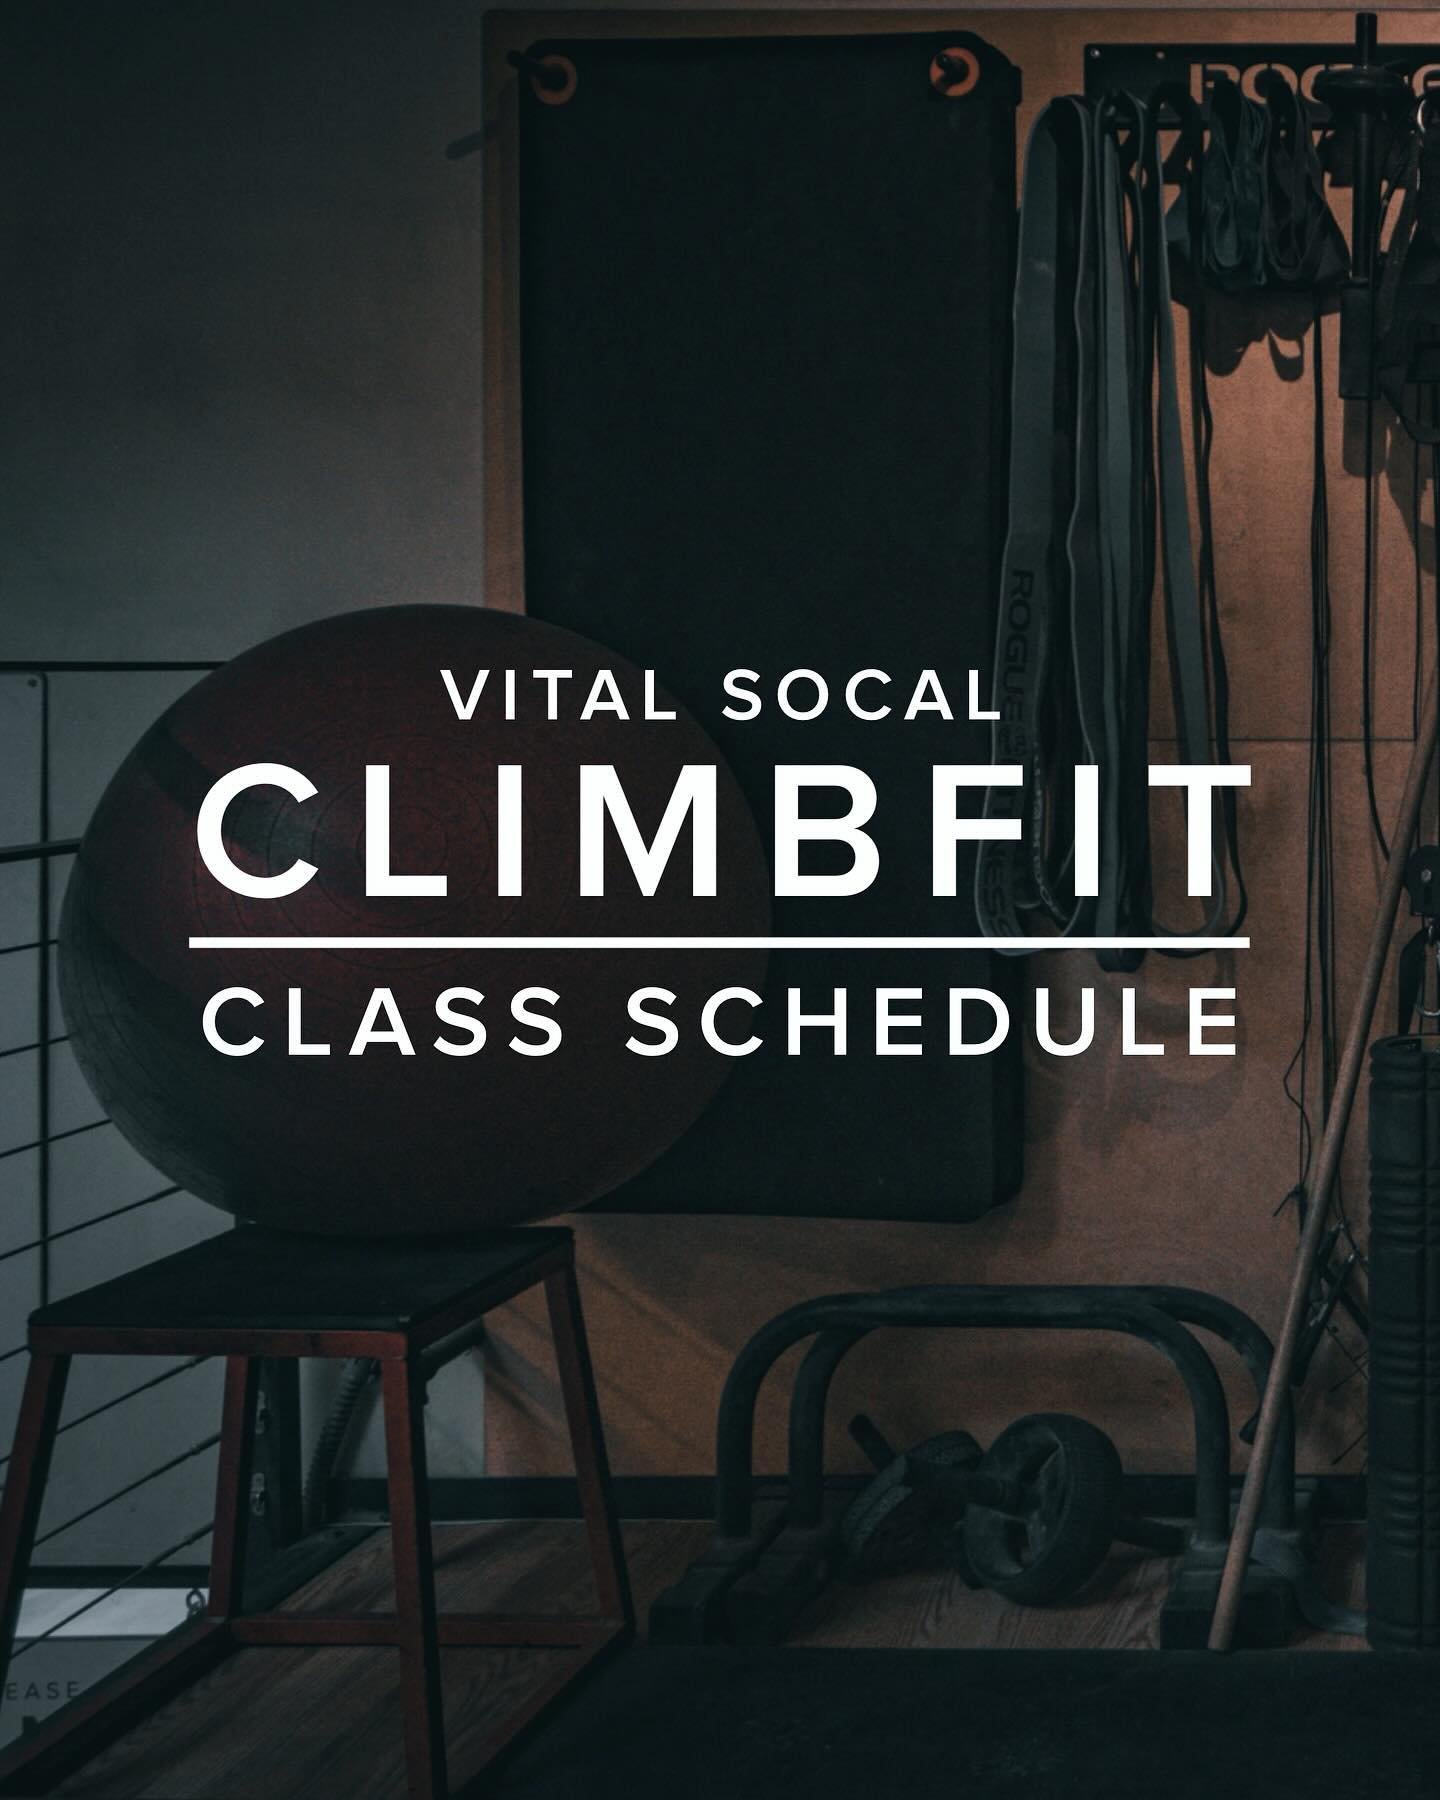 🚨 Attention ClimbFit fam! 🚨 

Coach Cooper is currently recovering from an ankle injury, so our Thursday class in Carlsbad is cancelled until May. We're sending him all our positive vibes for a speedy recovery! 🙏 

Make sure to stay updated on the